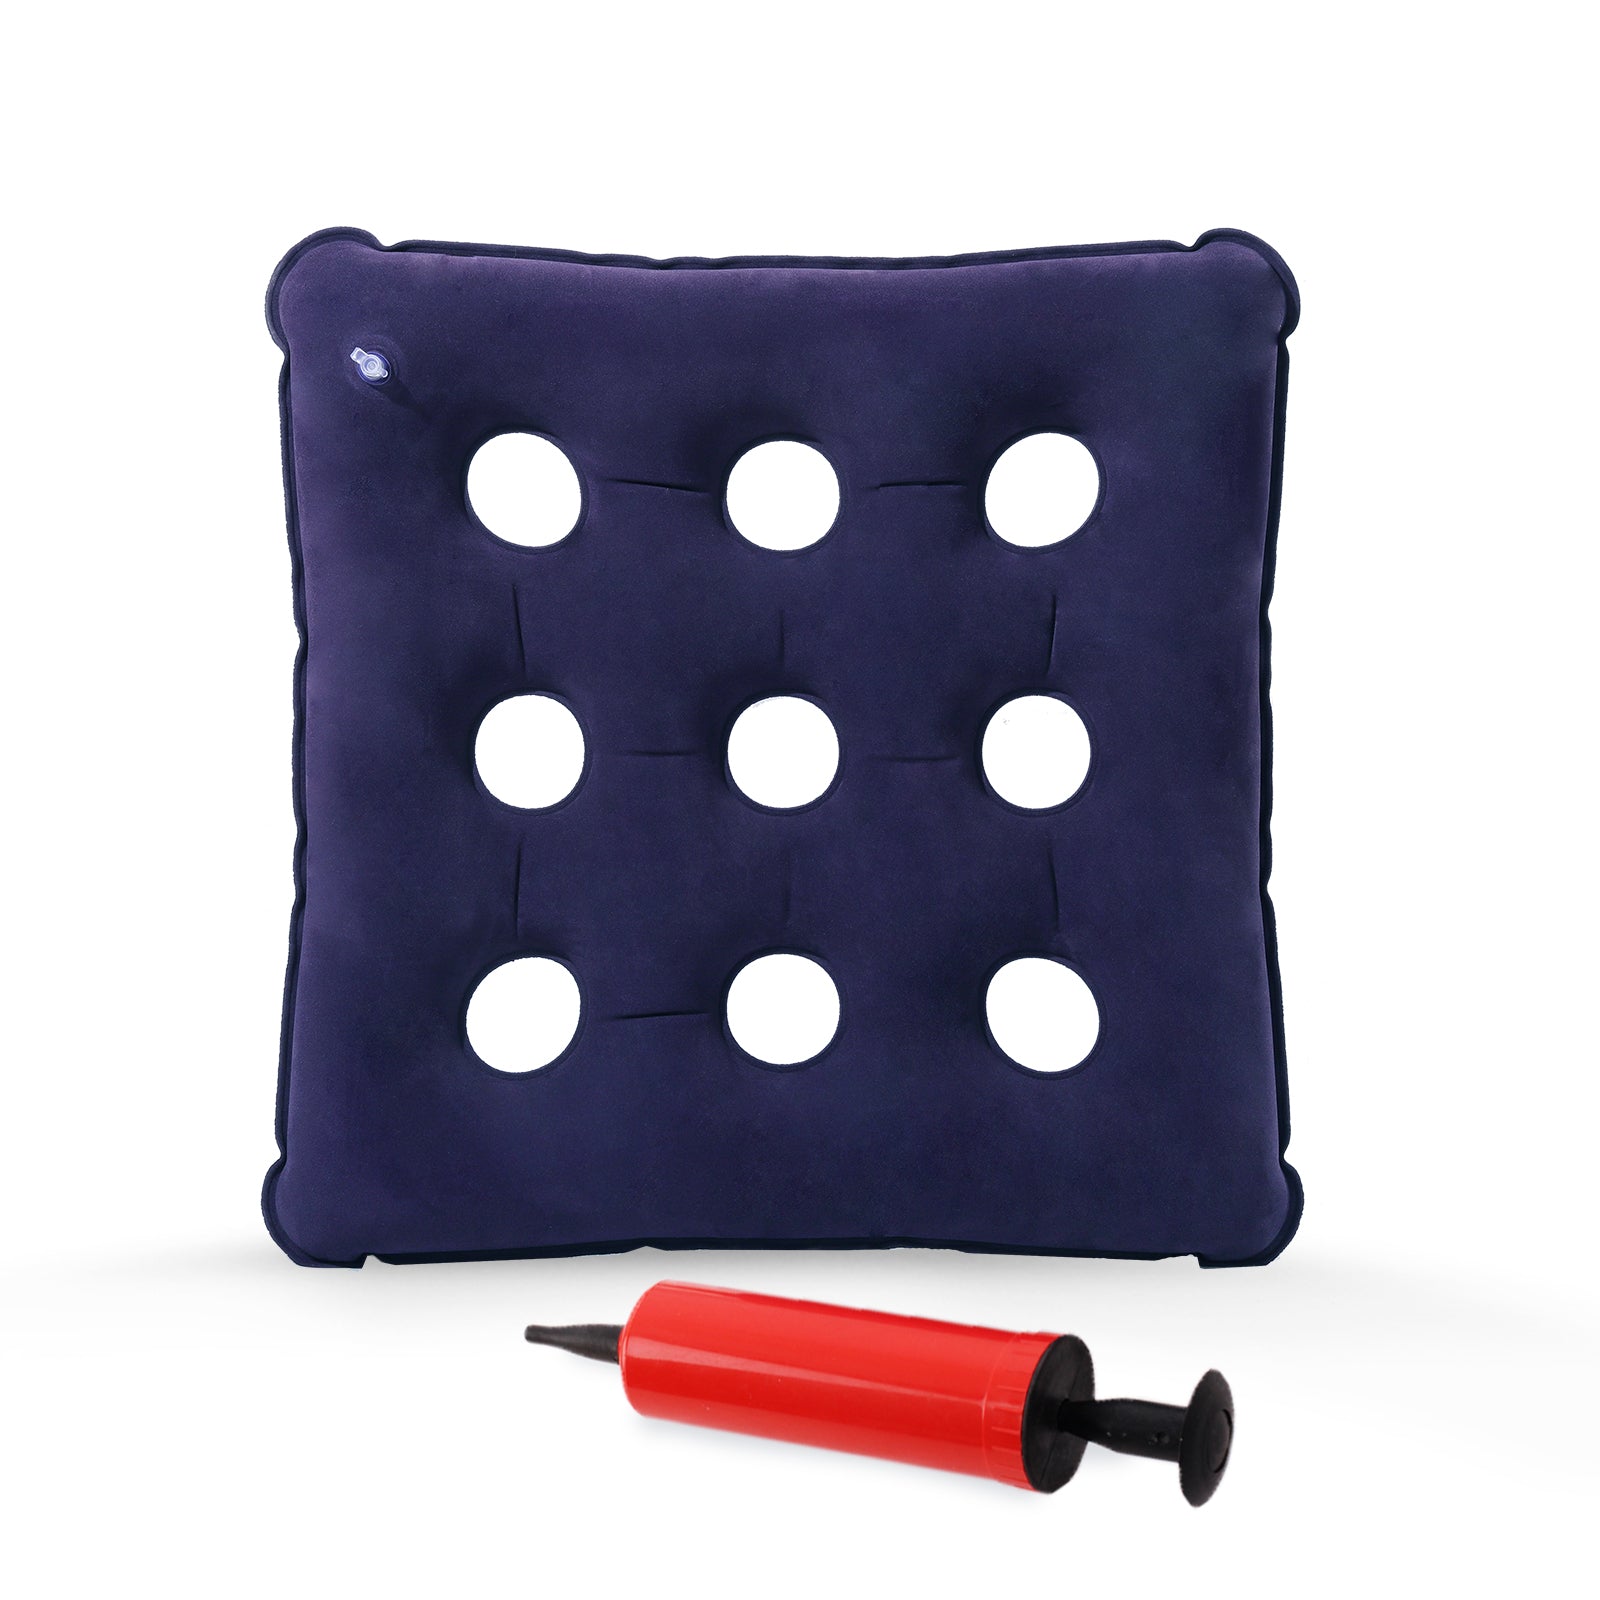 Pressure Relief Inflatable Pad, Pain Relief-Square